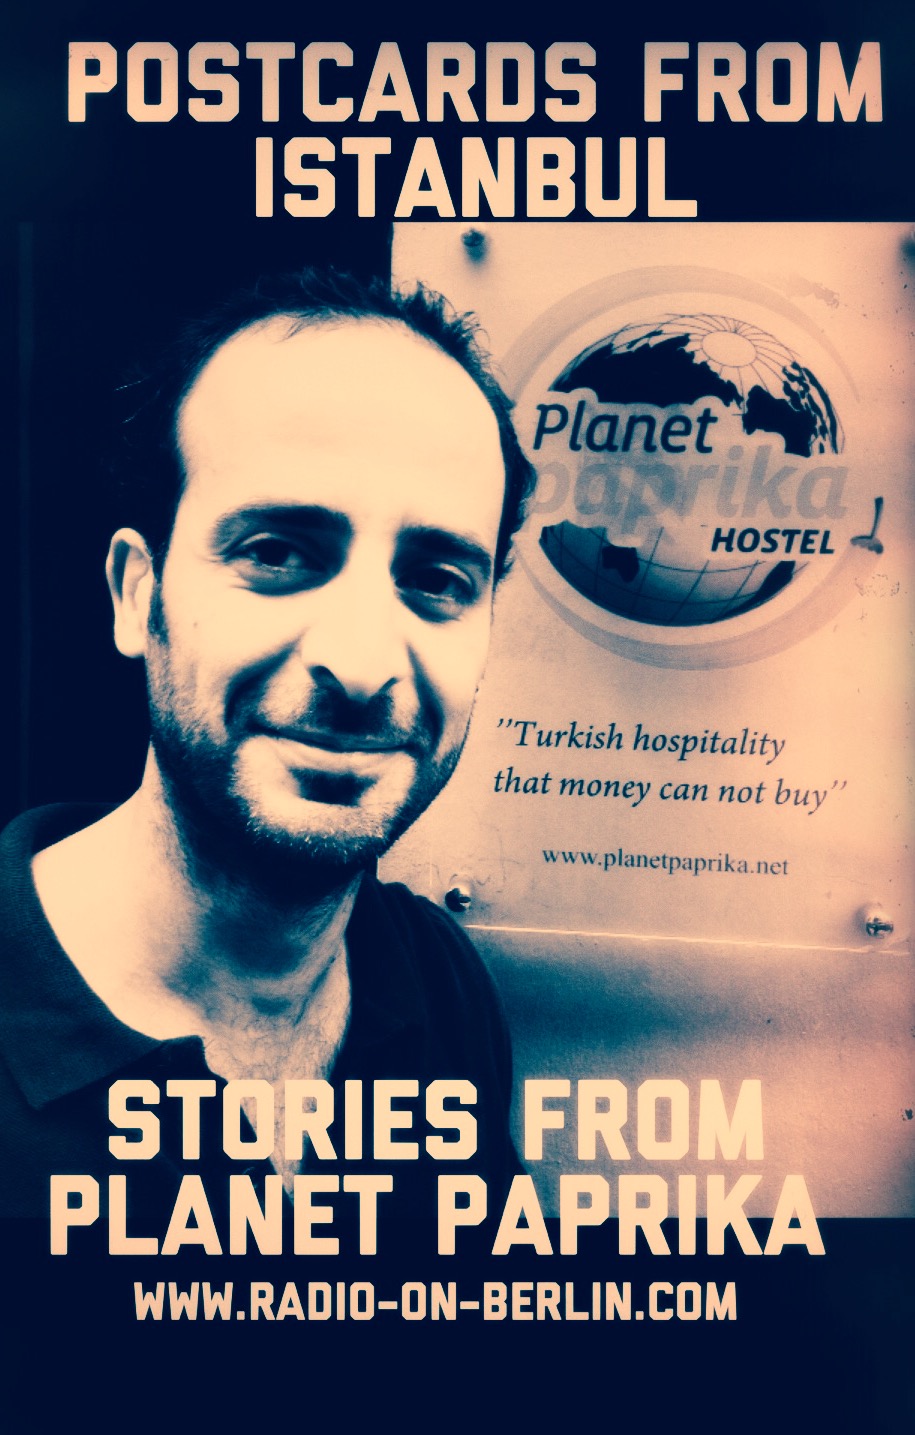 Postcards from Istanbul by Adrian Shephard, part 2 – stories from planet paprika, interview with Seraj Alfata